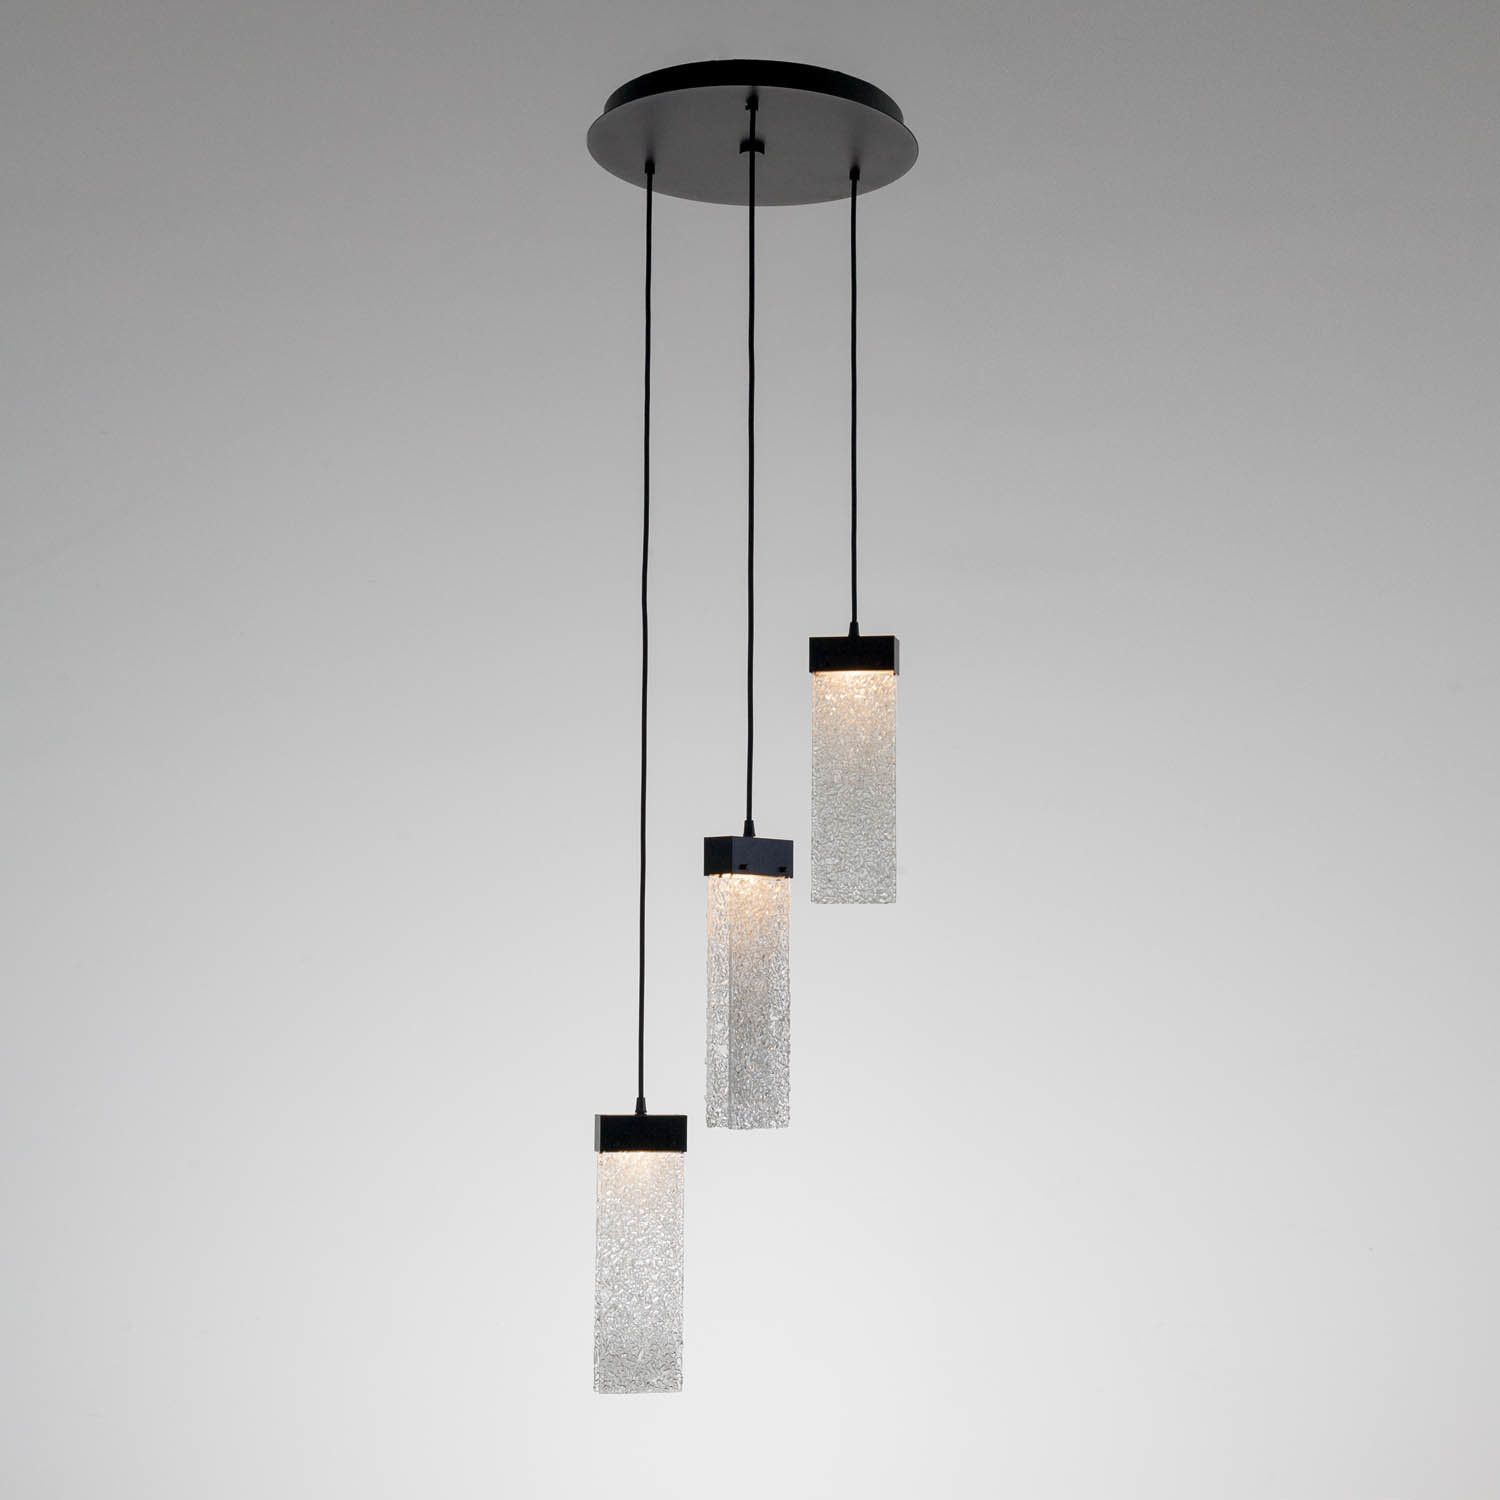 Parallel Glass Round Waterfall 3 Light Led Pendant With Schutt 5 Light Cluster Pendants (View 3 of 30)